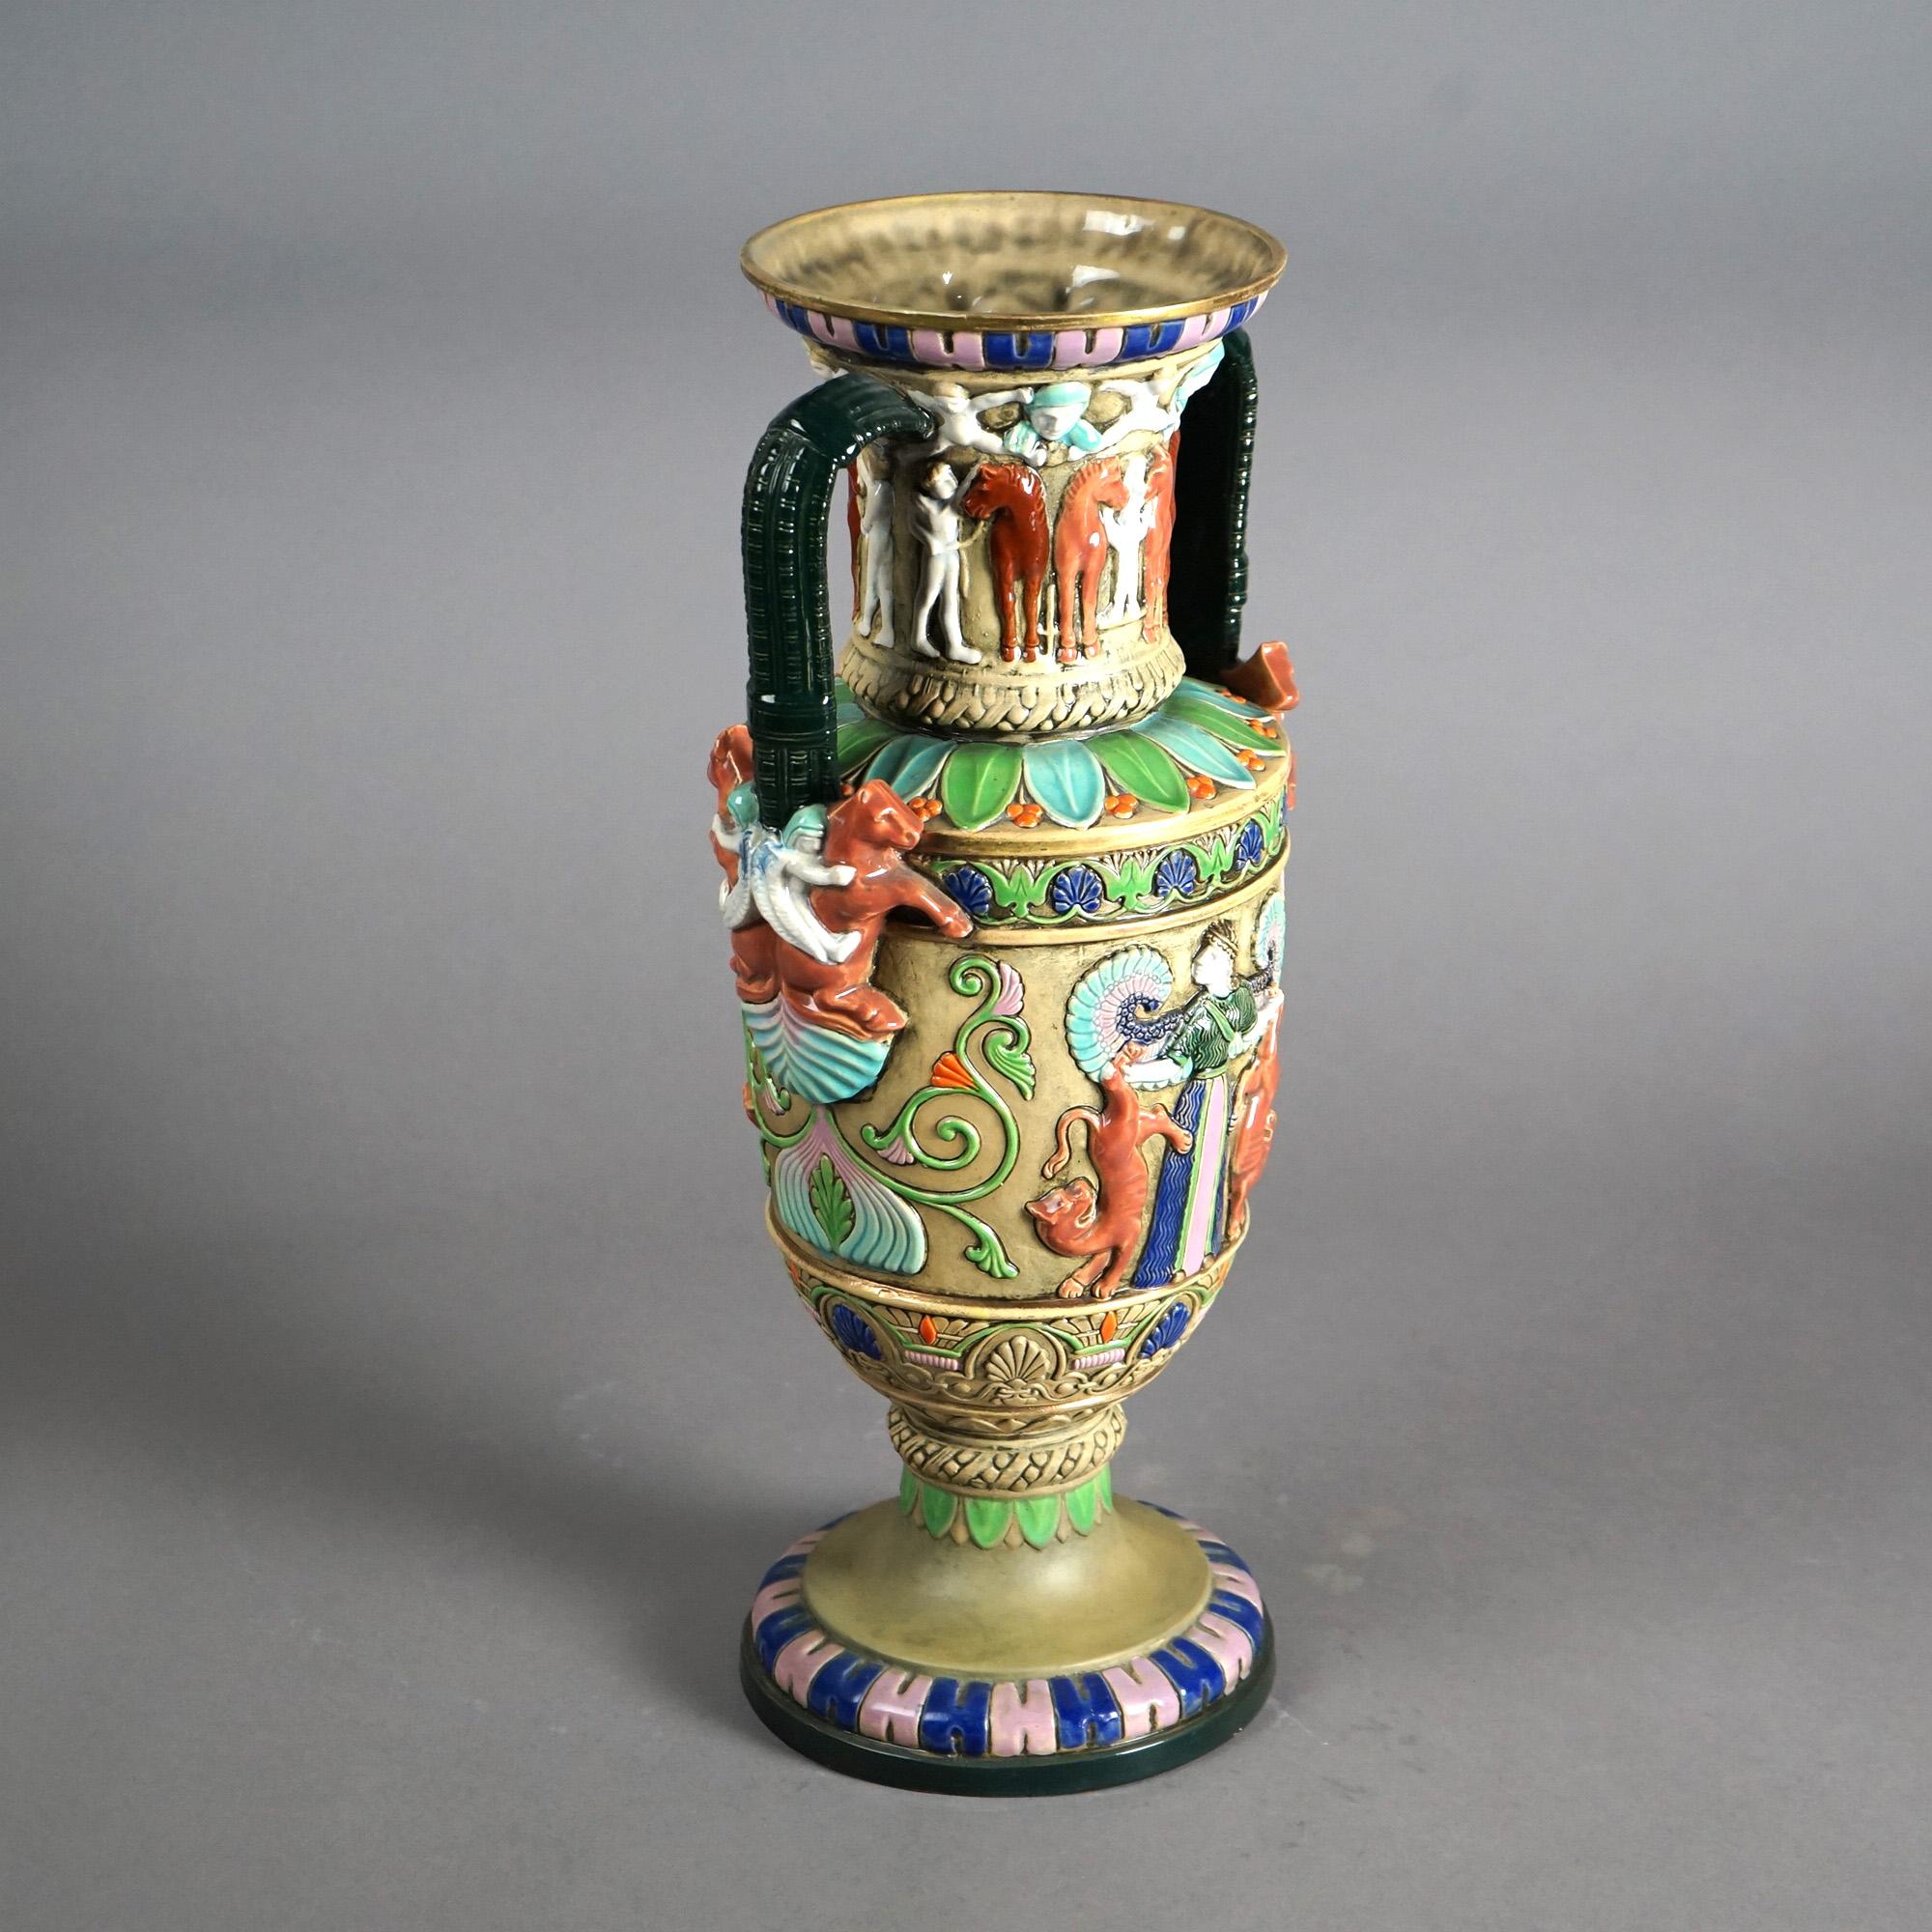 An antique Egyptian Revival vase offers Majolica Amphora Teplitz  pottery construction with enameled decoration, horses and figures, signed on base as photographed, c1910
Vase C1910

Measures- 18''H x 8.5''W x 8.5''D